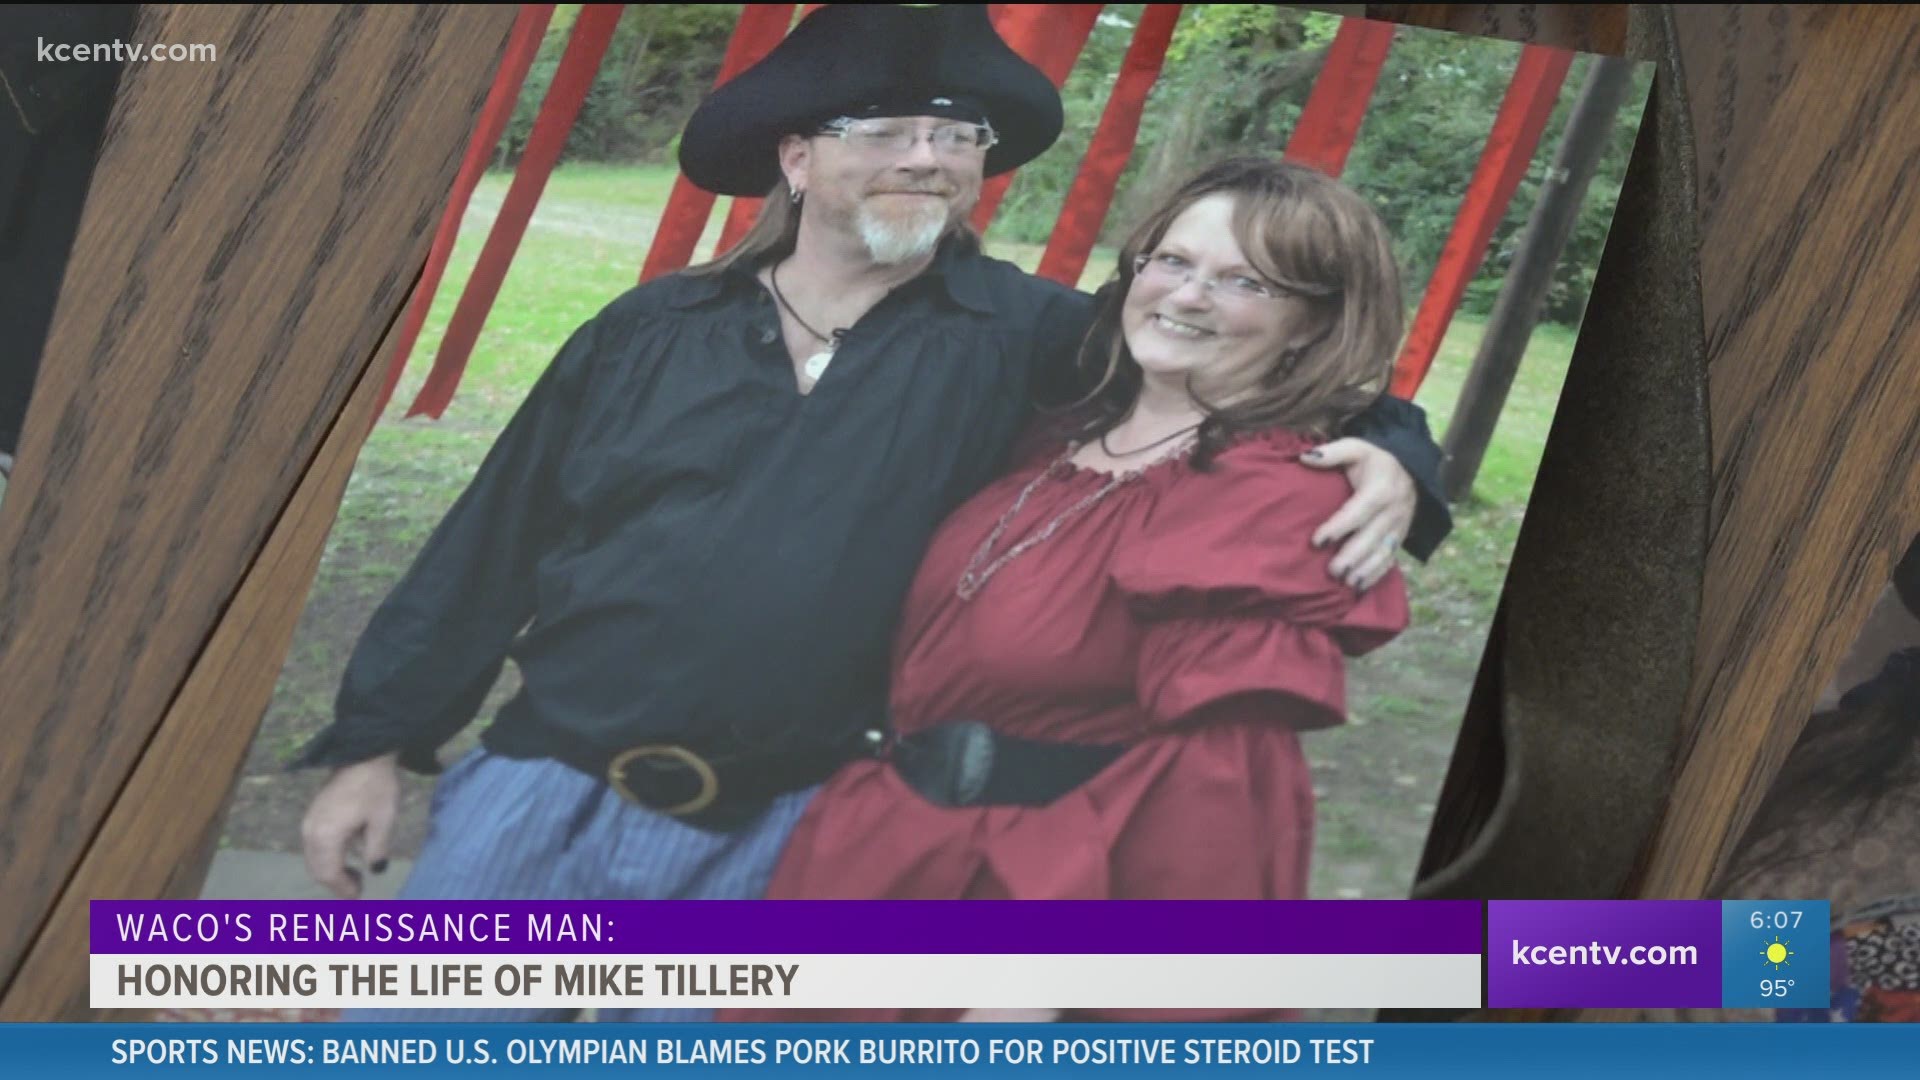 A charity Renaissance fair is planned to honor Tillery with proceeds going to Baylor Scott & White Cancer Center and Shepard's Heart Food Pantry.